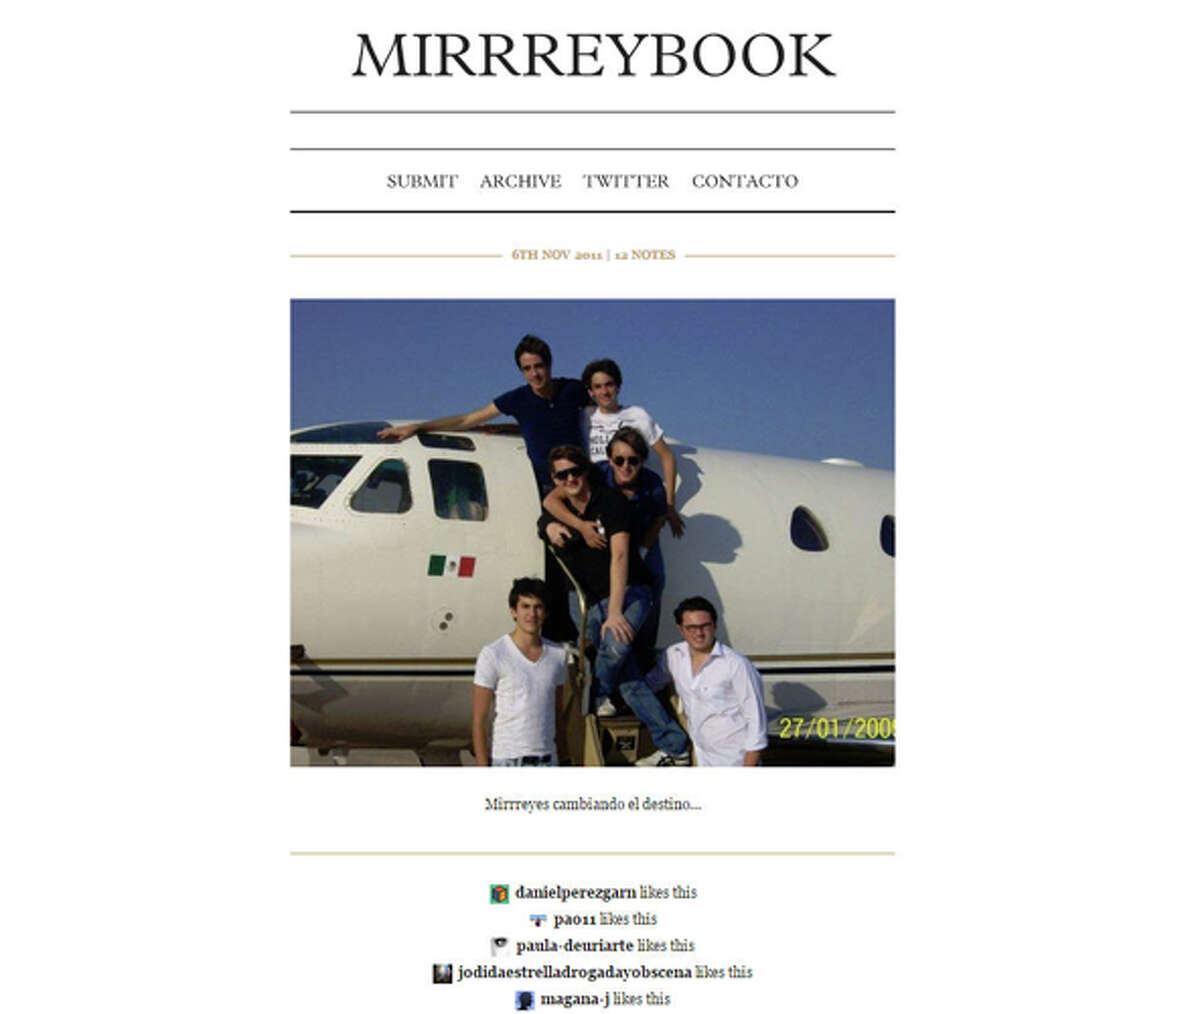 Los mirreyes is considered one of the first "youth identities" to emerge in the 21st Century.